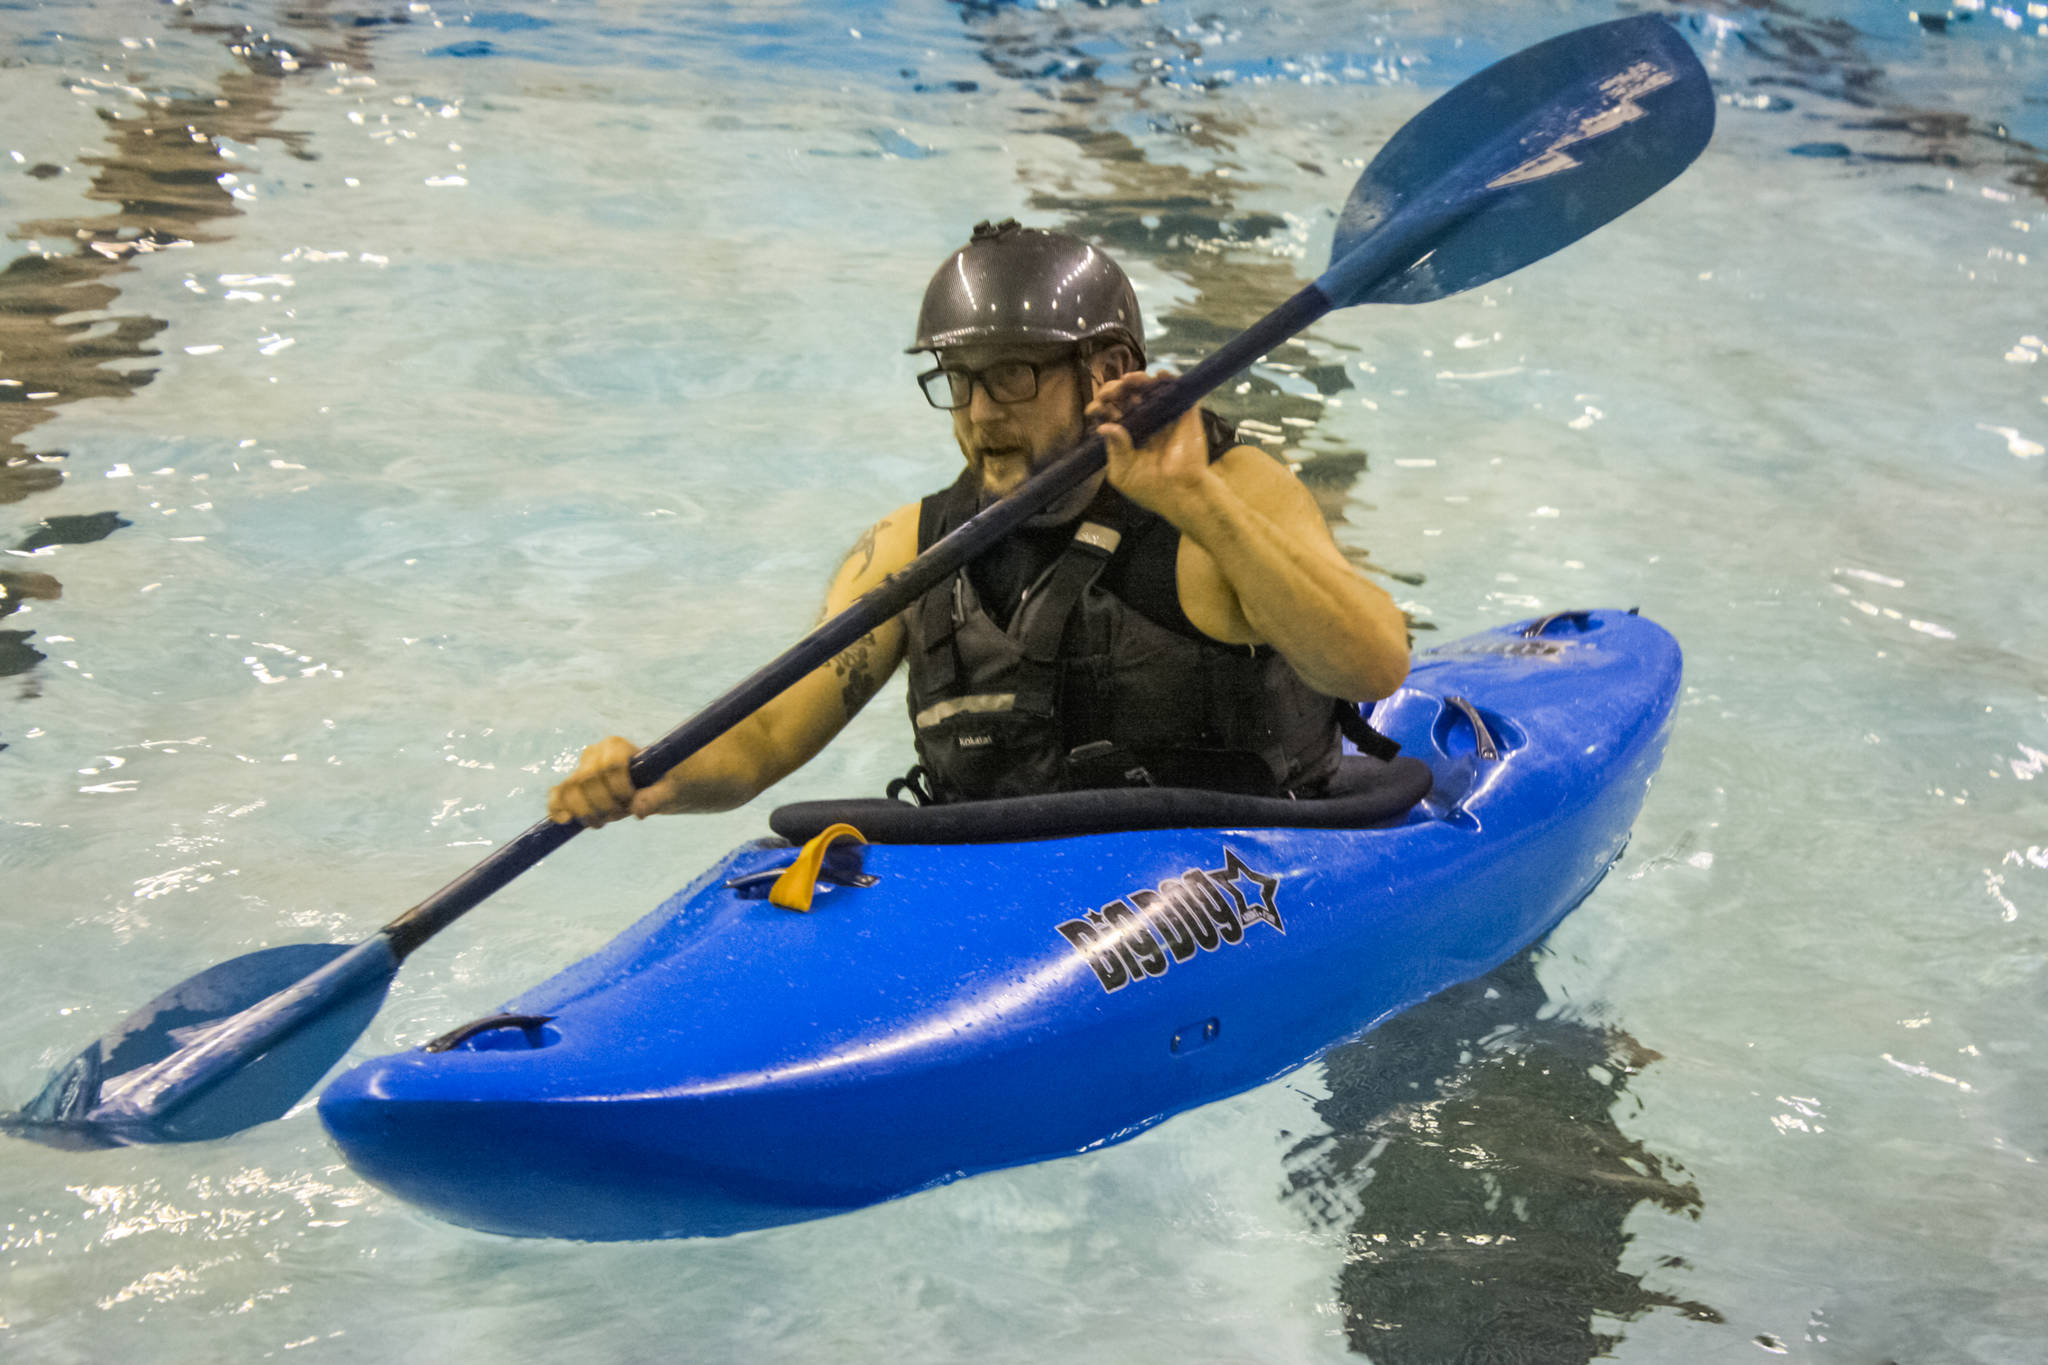 Matthew Pyhala, owner of the Immersion Paddling Academy, provides lessons during a Dec. 13 training session at the Skyview pool. (Photo by Erin Thompson/Peninsula Clarion)